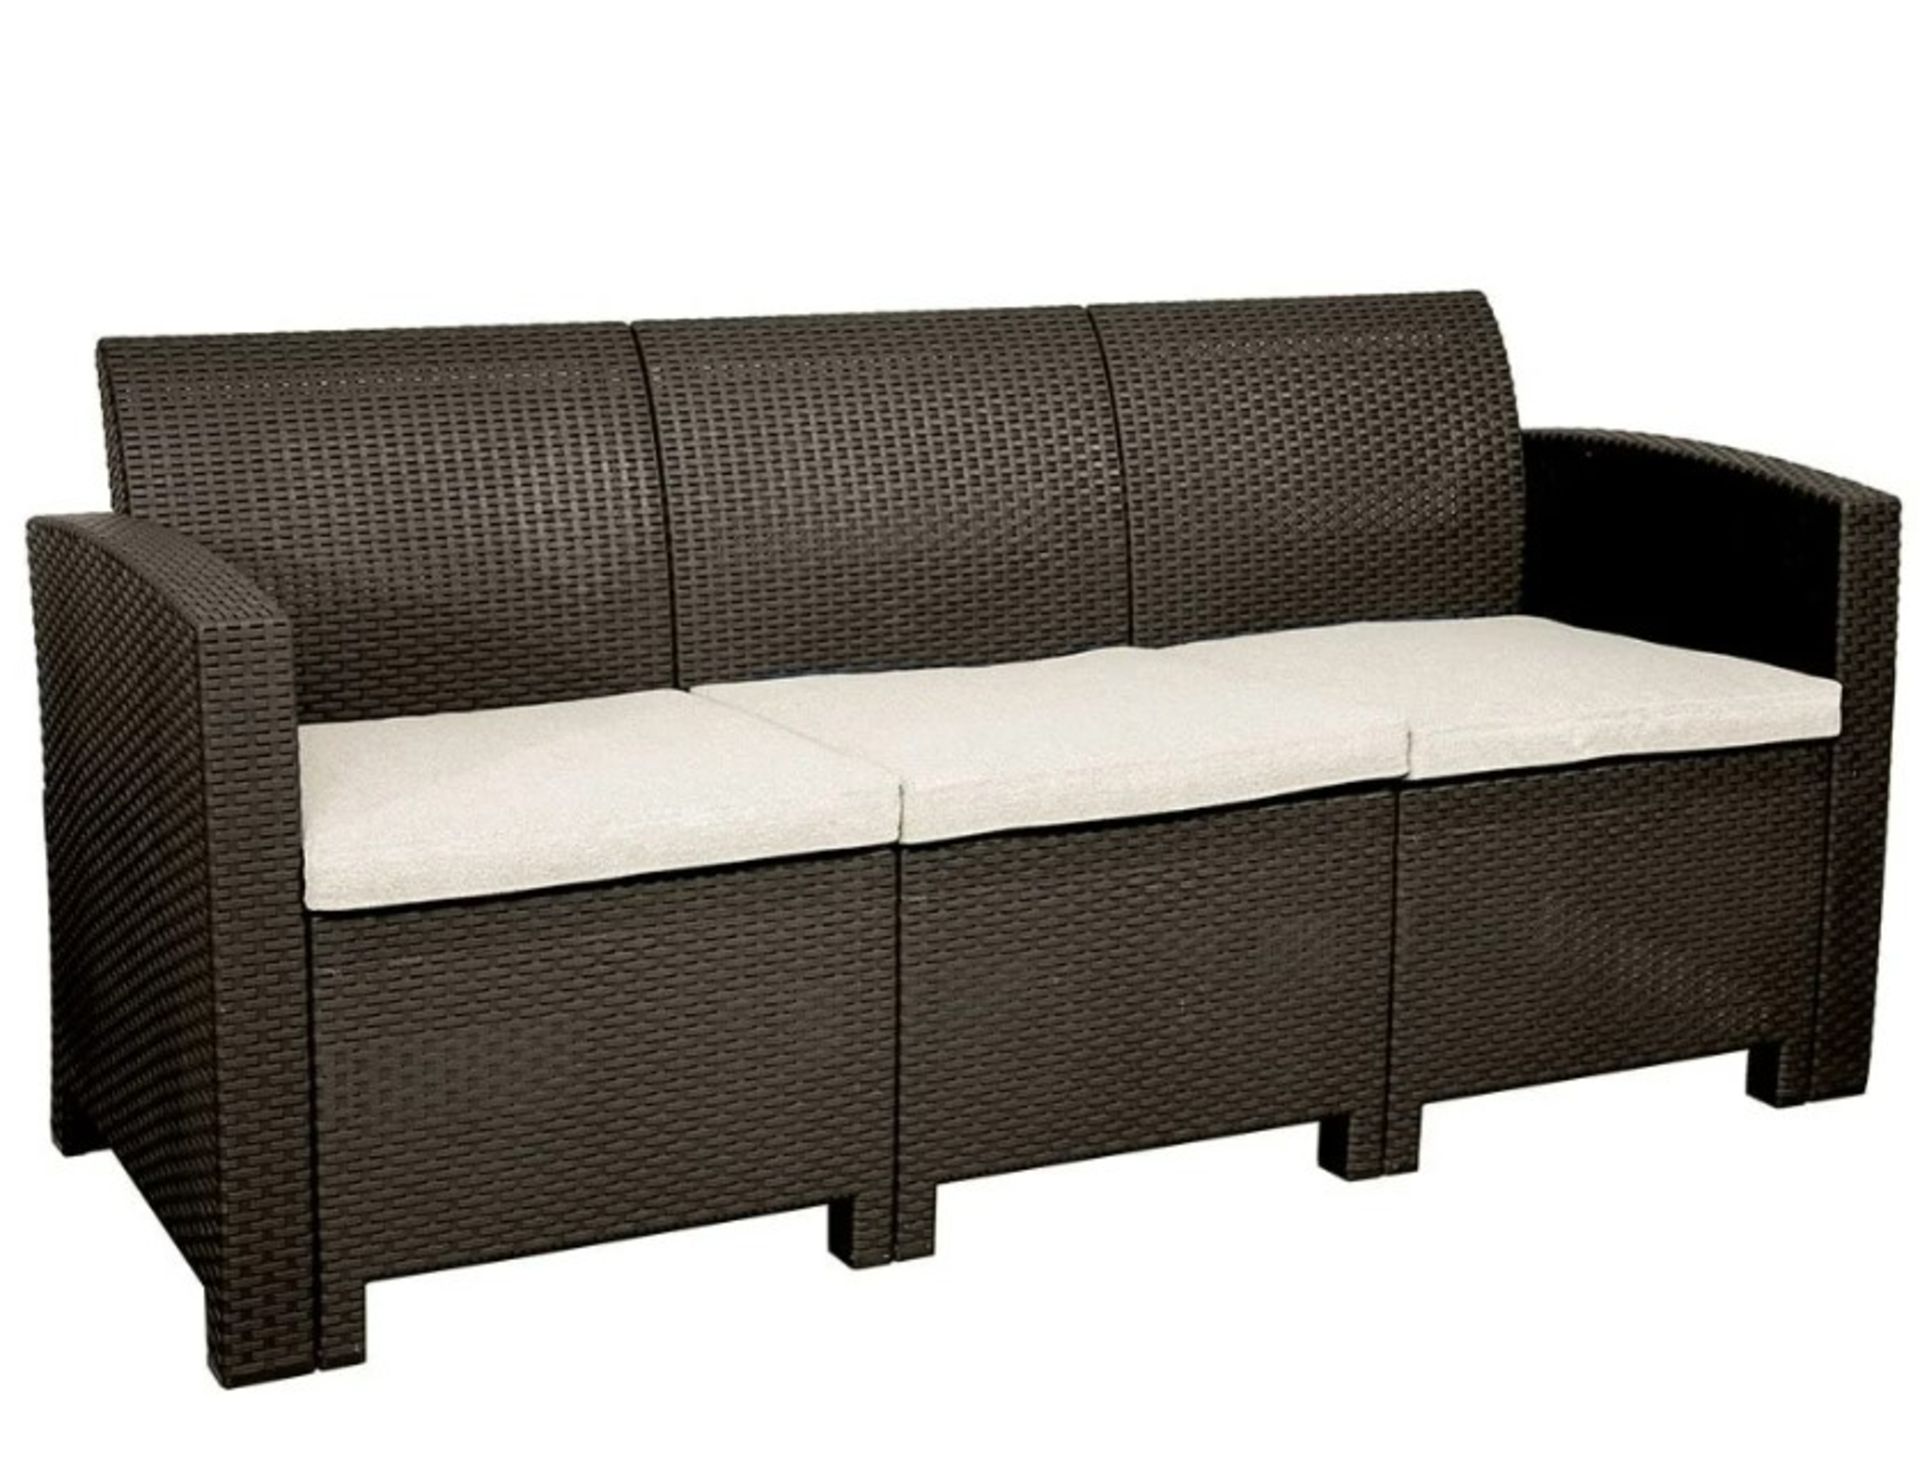 New Boxed Marbella 3-Seater Rattan-Effect Sofa in Brown. RRP £399.99. With a unique modern finish, - Image 2 of 4